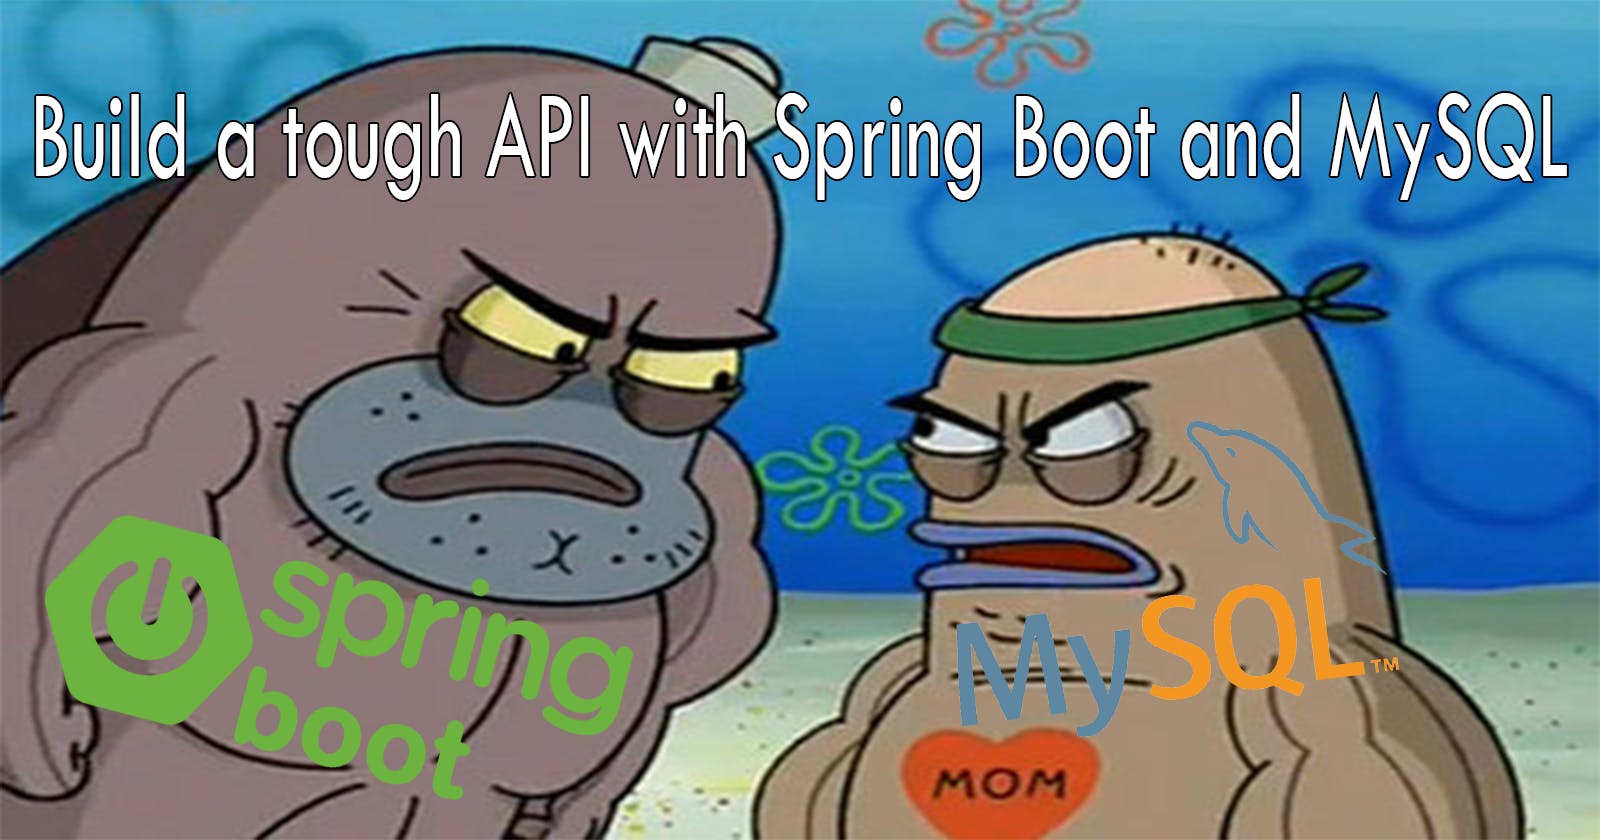 Build a RESTful API using Spring Boot and store the data with MySQL